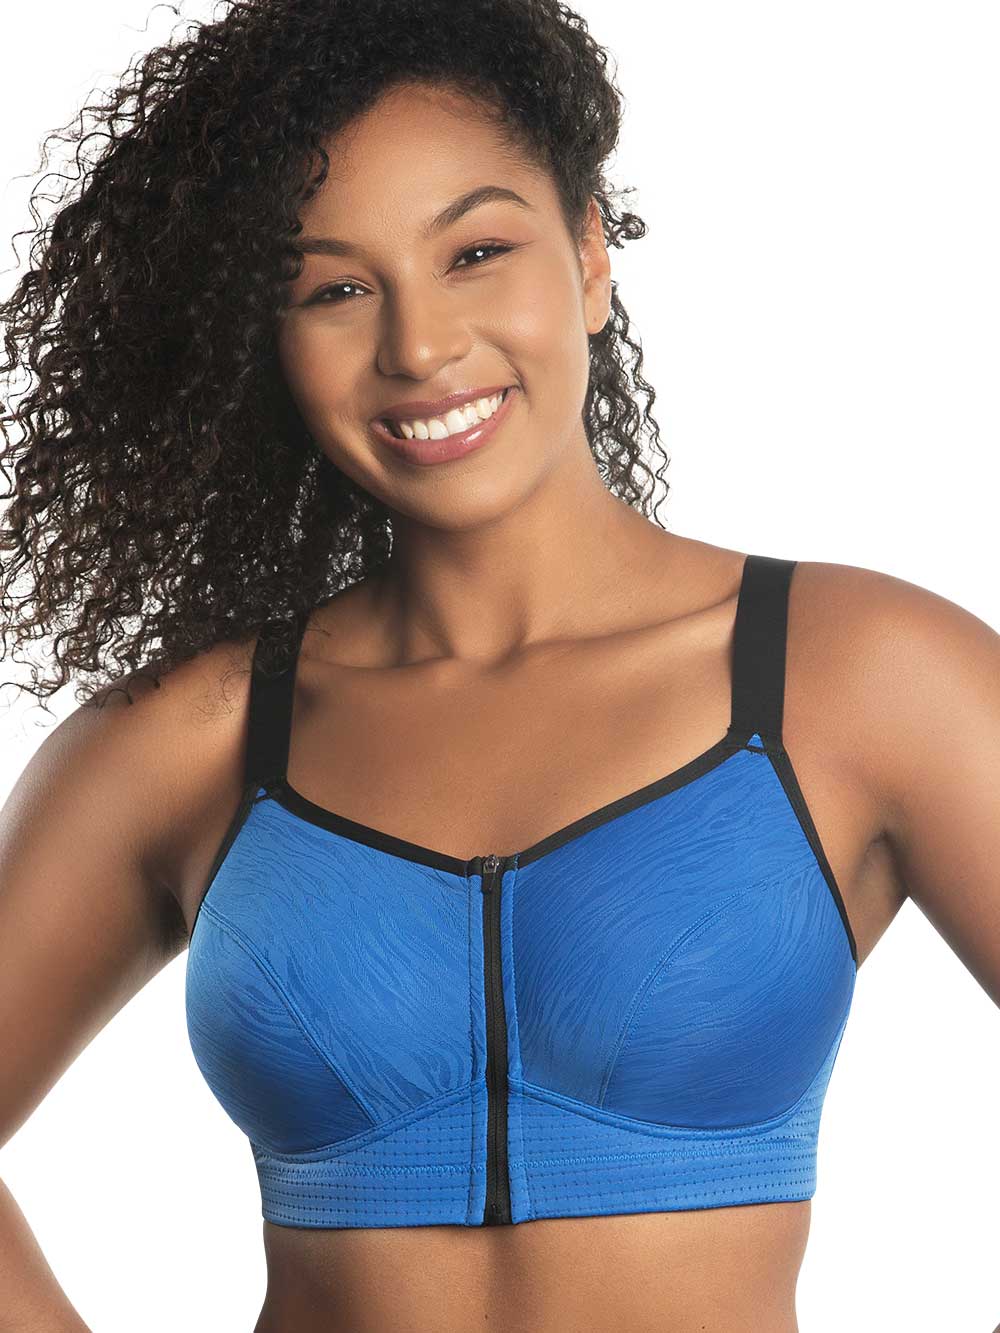 32E Bras: Bras for 32E Boobs and Breast Size Tagged FRONT CLOSURE BRA -  HauteFlair